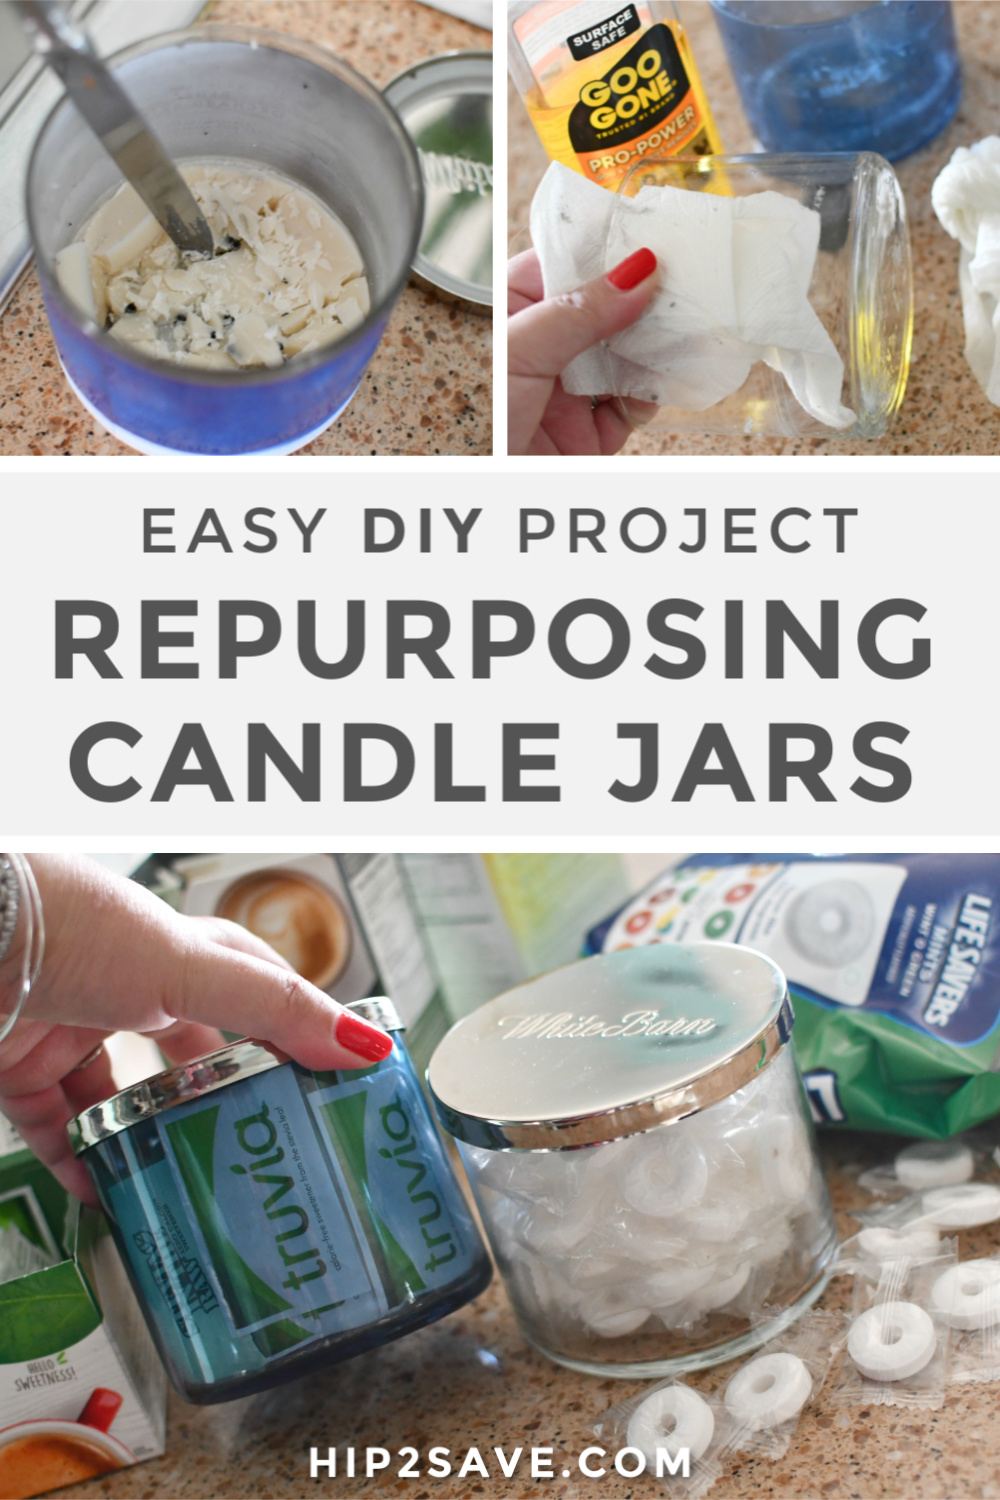 17 Ways to Reuse old candle jars & how to remove the wax! Create cool